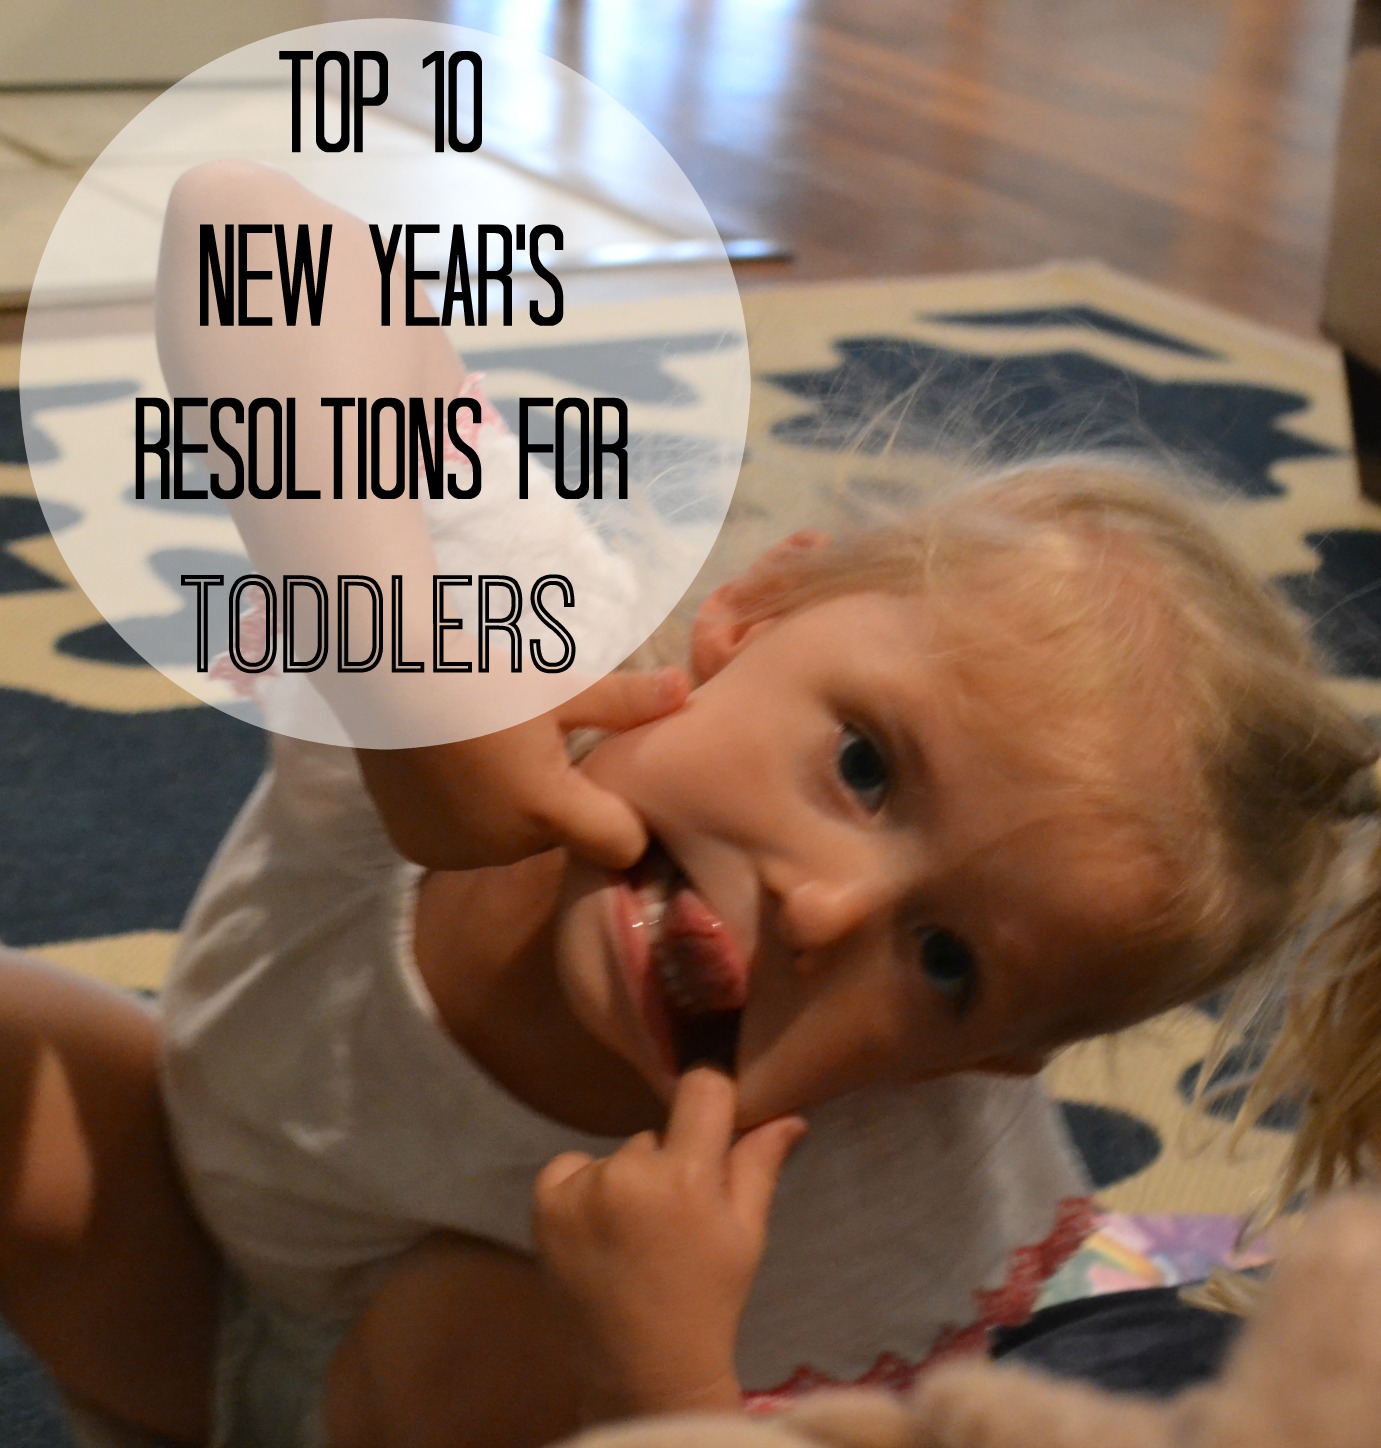 Top 10 New Years Resolutions for Toddlers 2